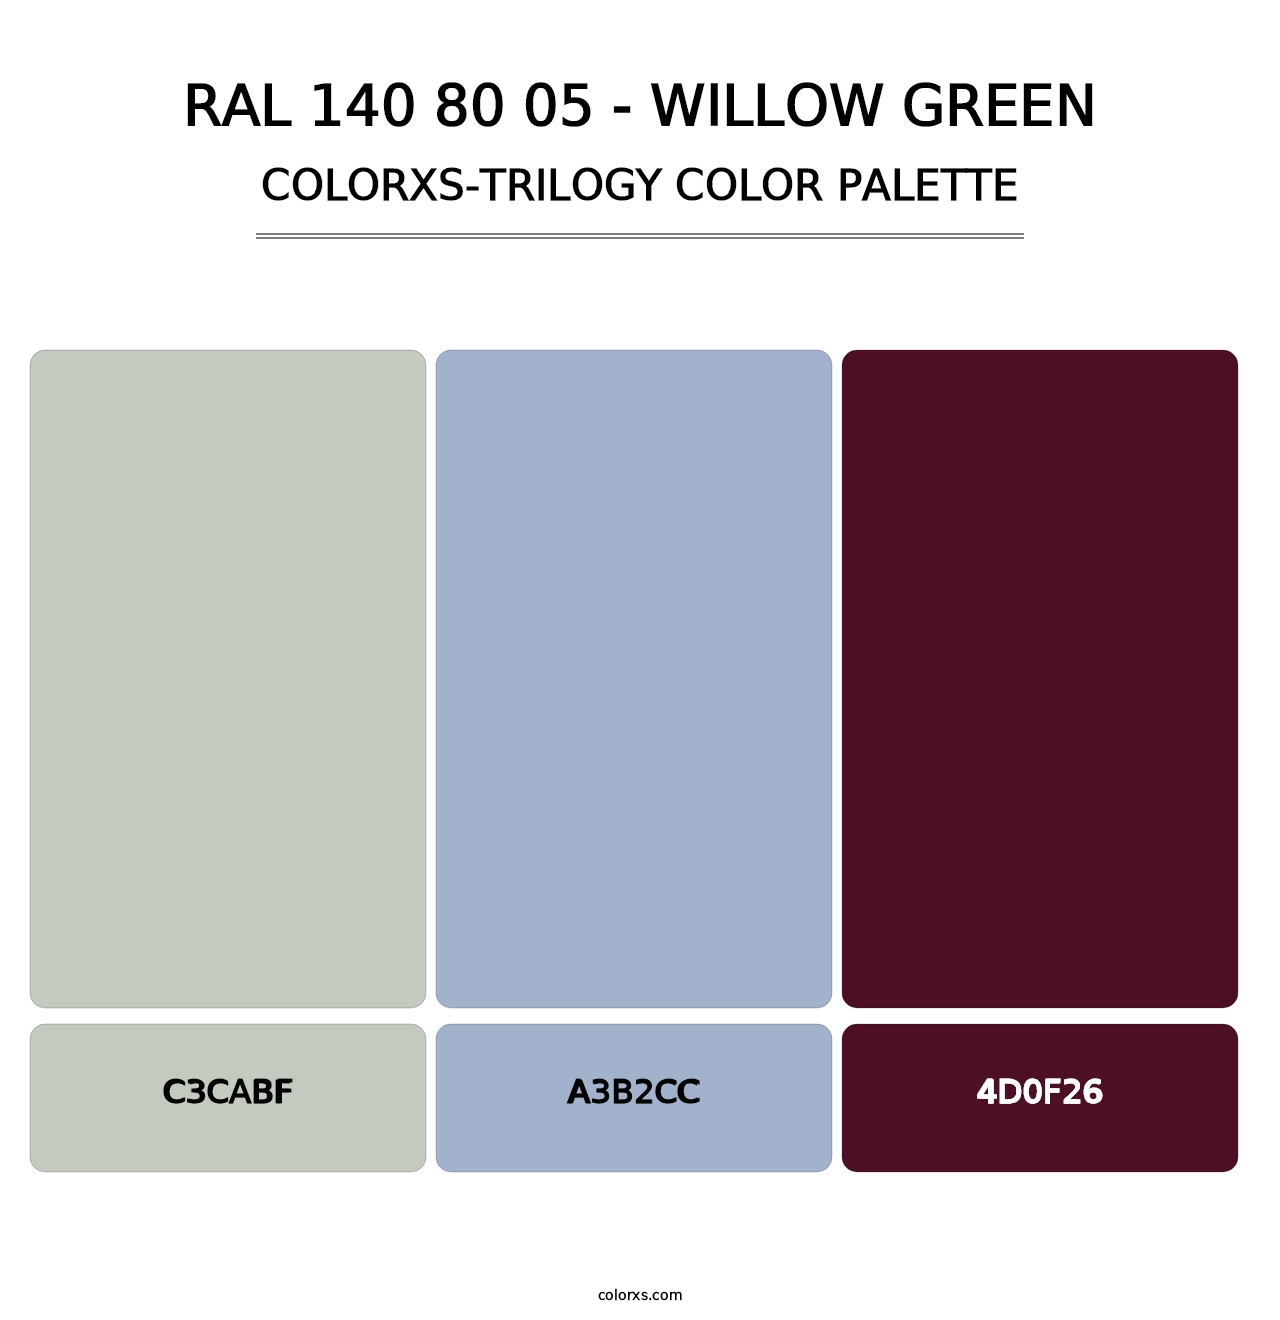 RAL 140 80 05 - Willow Green - Colorxs Trilogy Palette